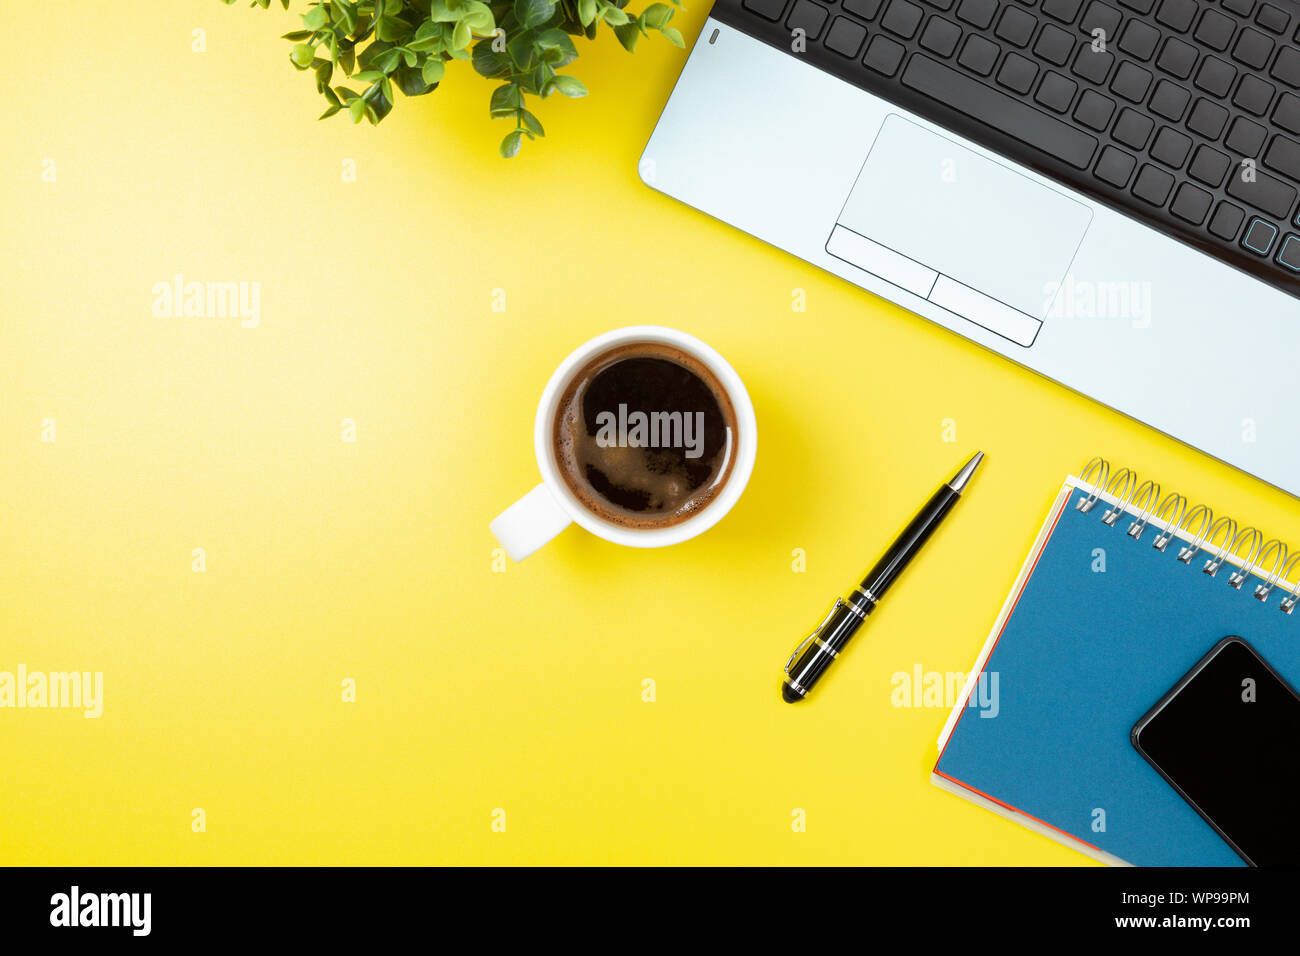 Laptop, notebook, smartphone, coffee and pen on yellow background. Office desk table with modern accessories Stock Photo